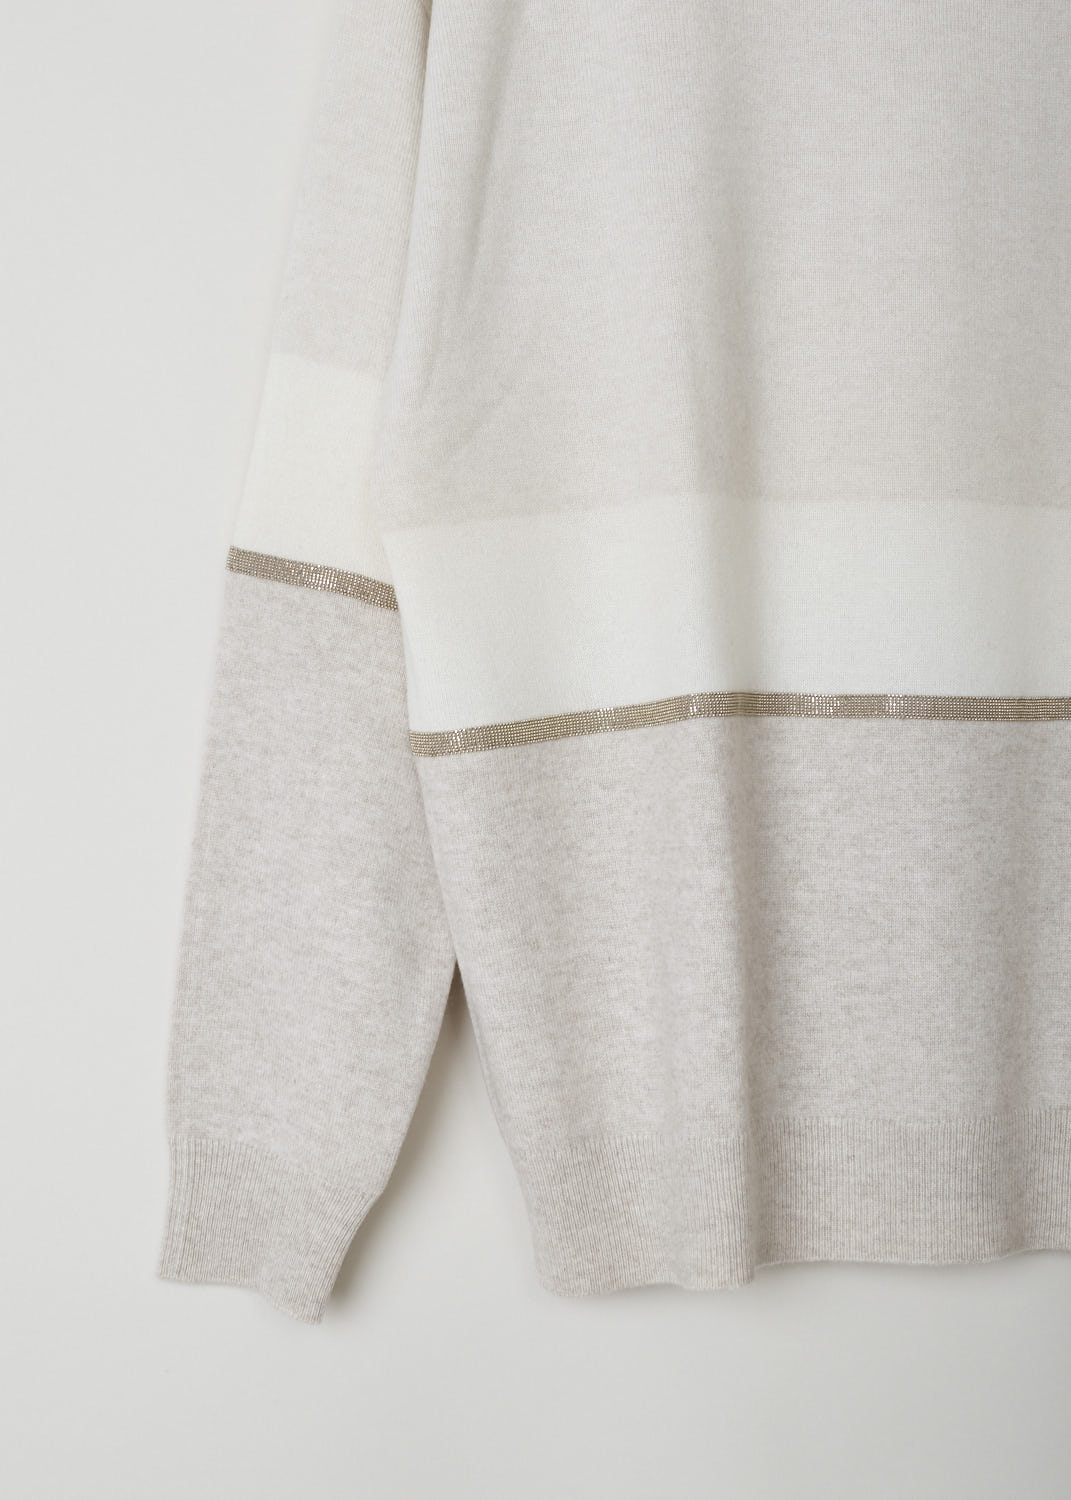 BRUNELLO CUCINELLI, THREE-TONE SWEATER WITH BEADED DETAILING, Beige, Detail, Three-tone sweater in white and pale grey tones with bead-embellished trims. The sweater features long sleeves and has a ribbed hem. 
